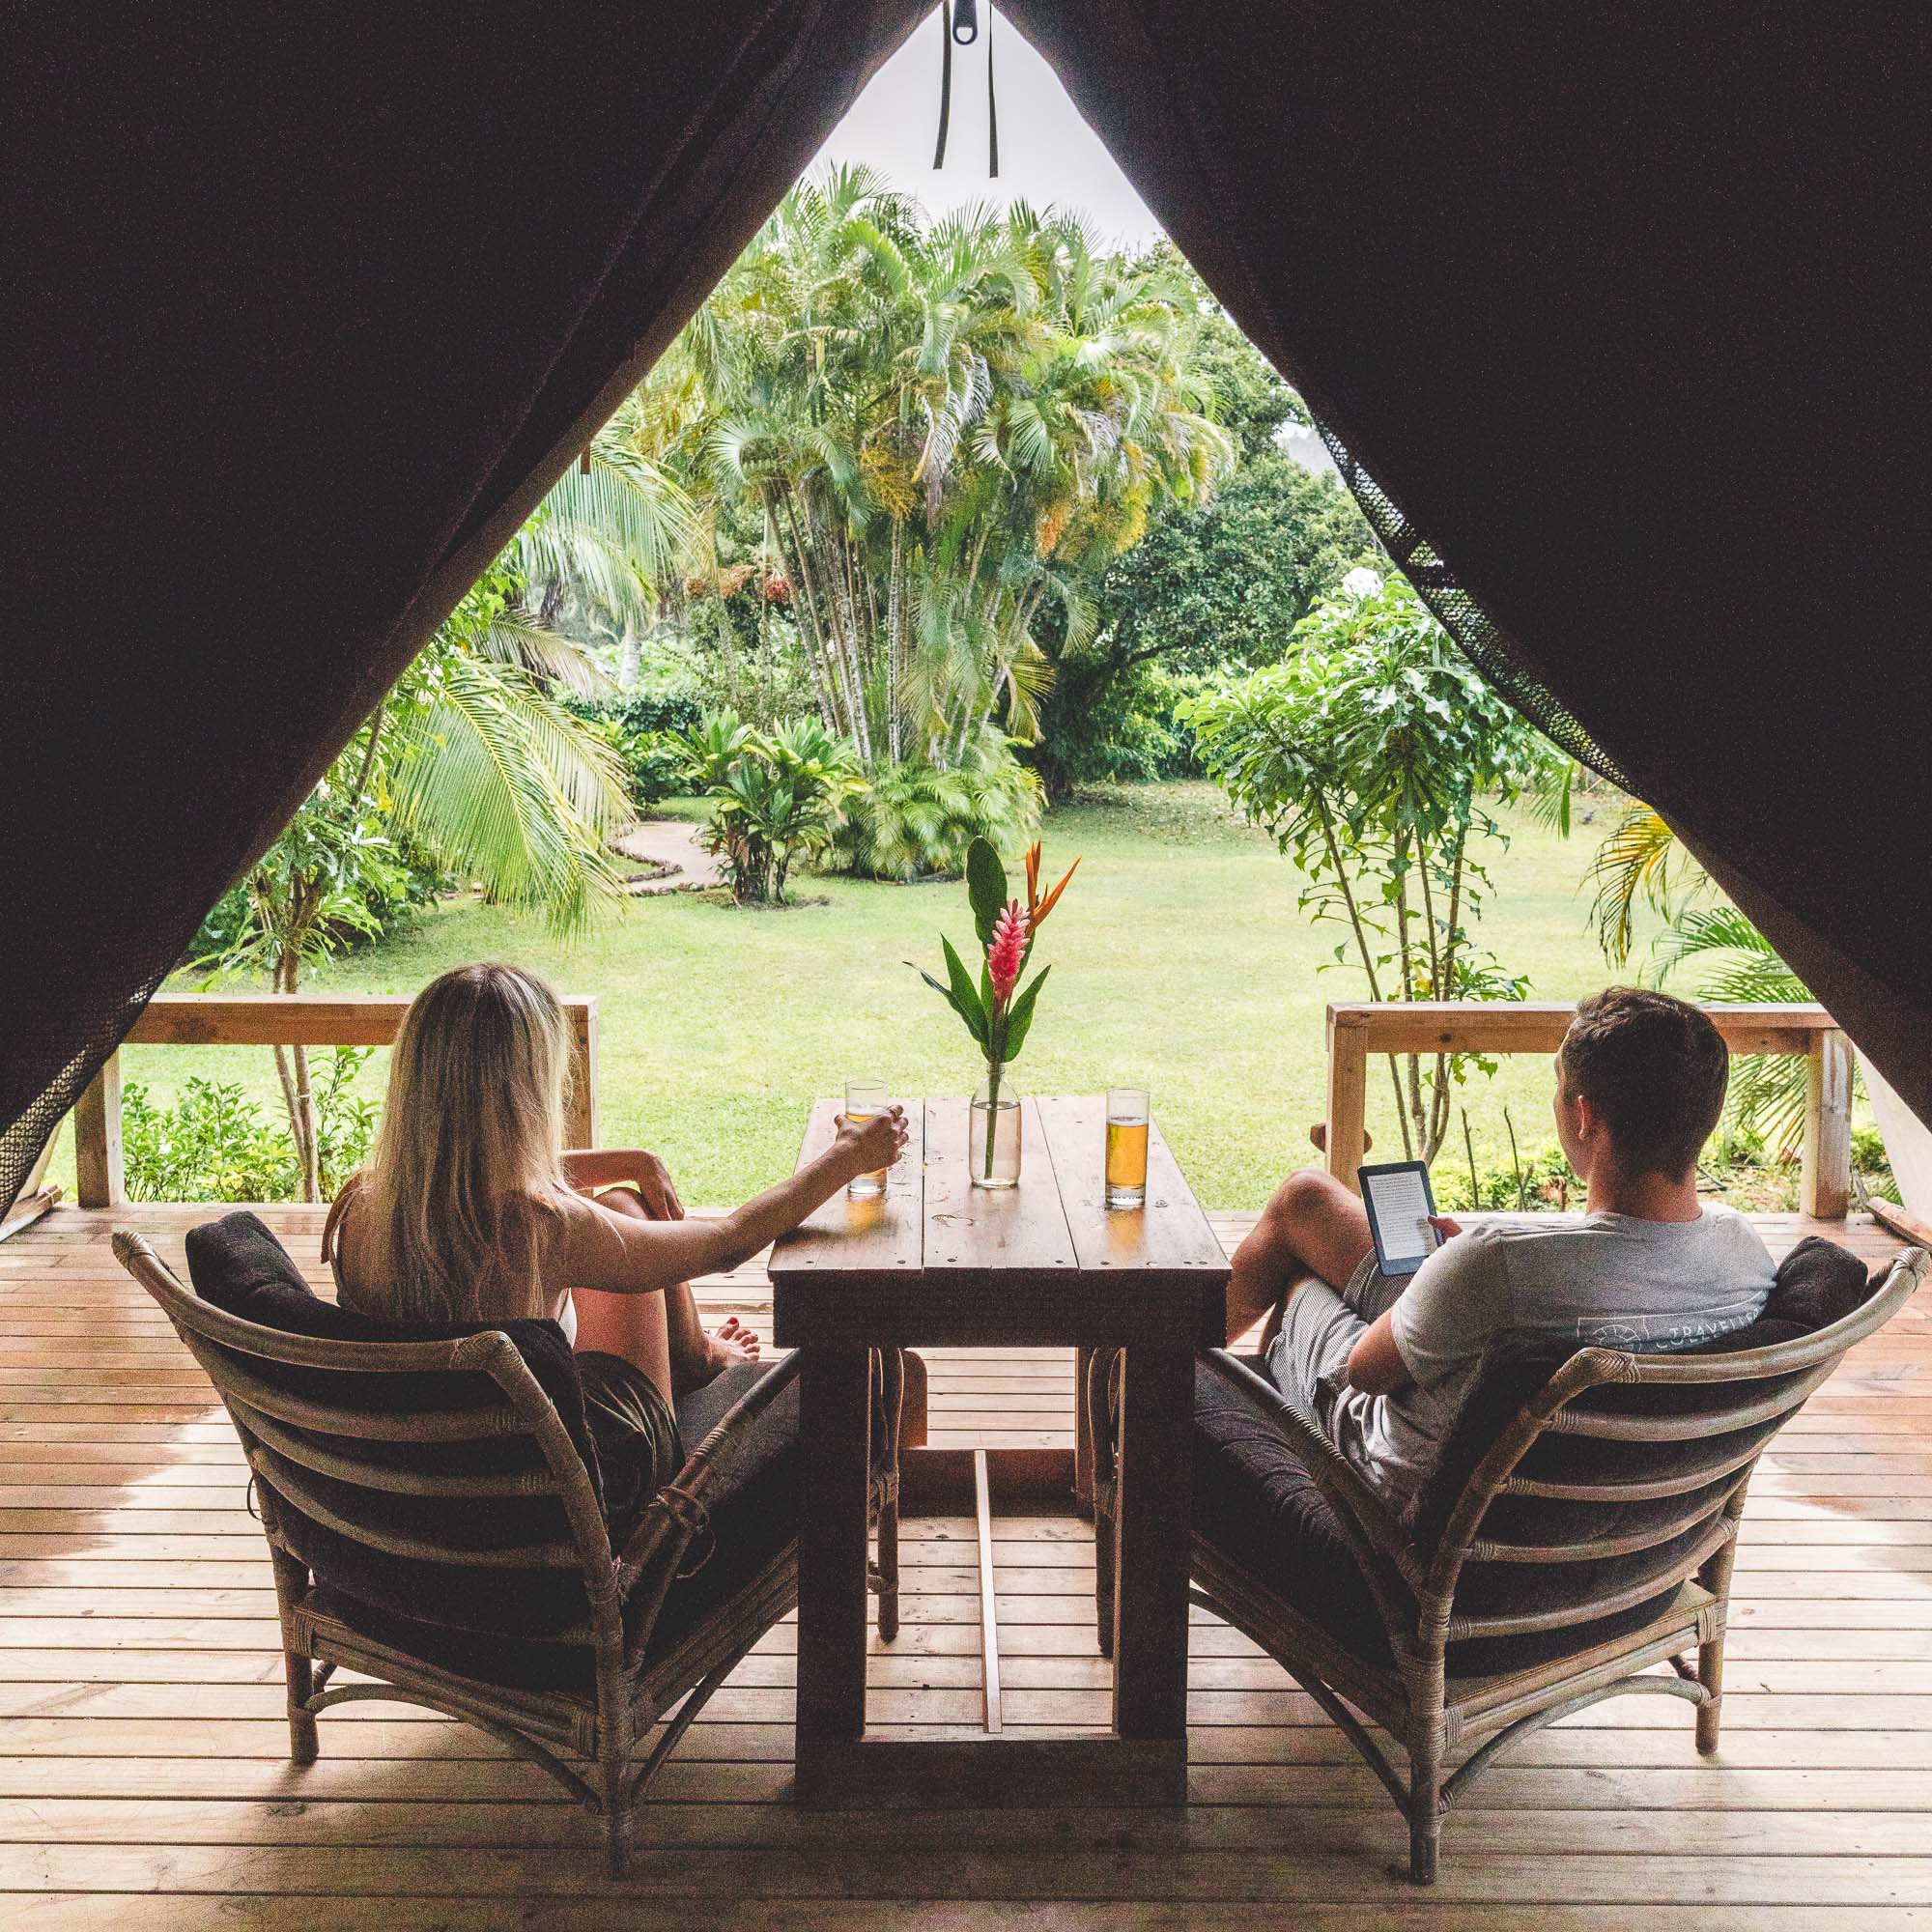 Glamping in a tent at the Ecolodge in Rarotonga, Cook Islands